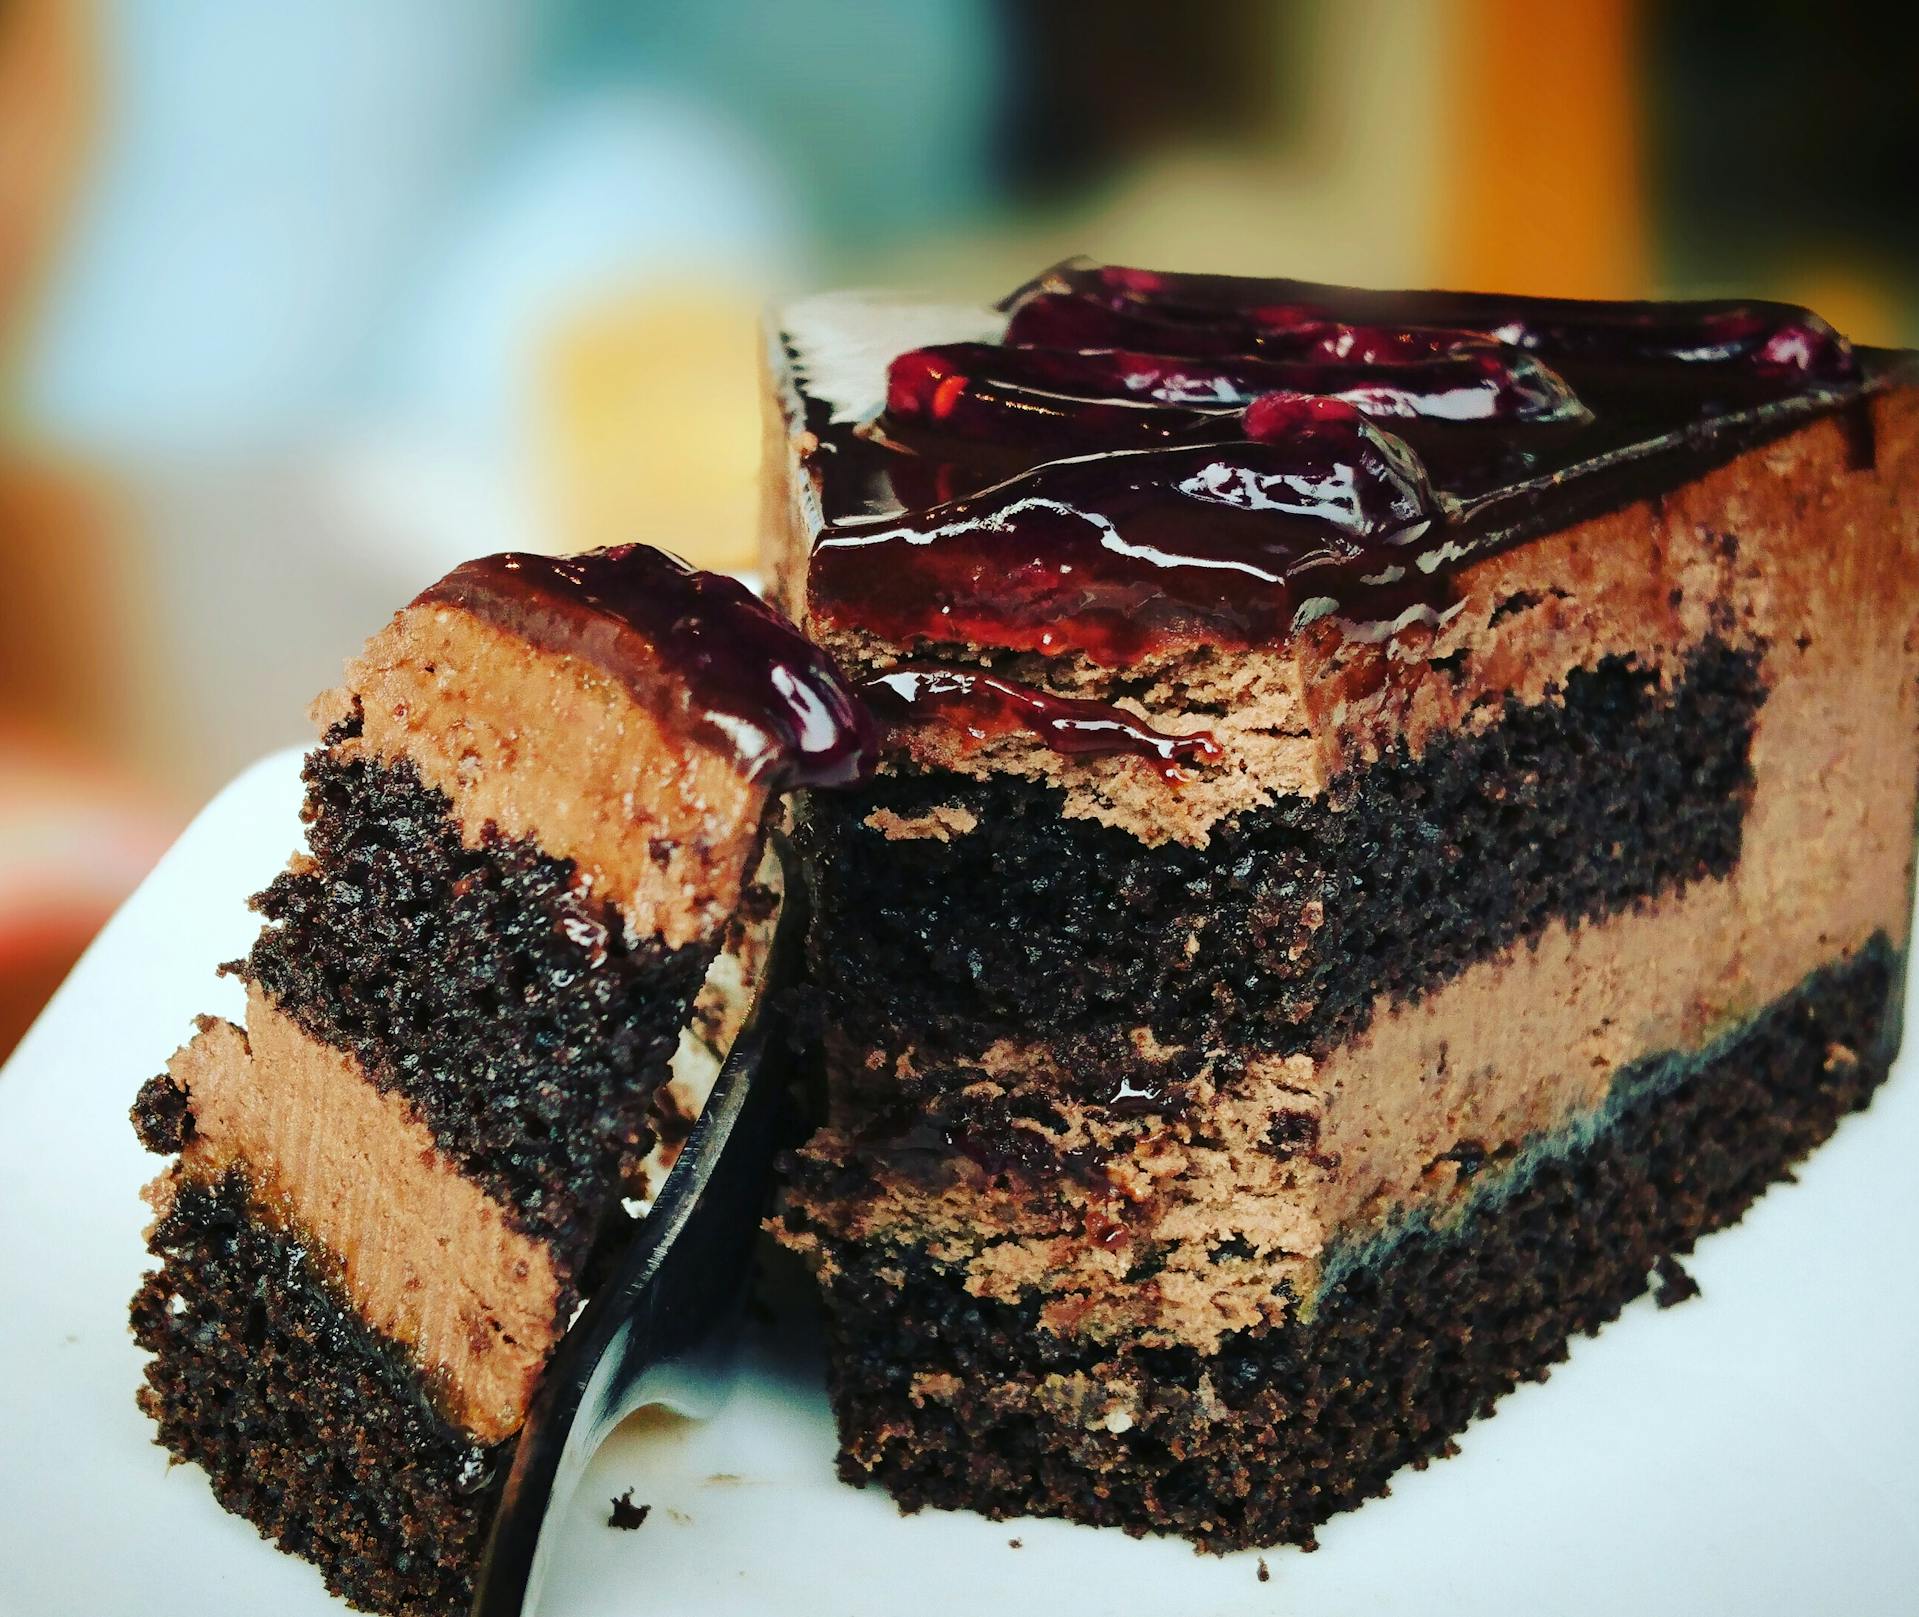 A sliced cake on a plate | Source: Pexels